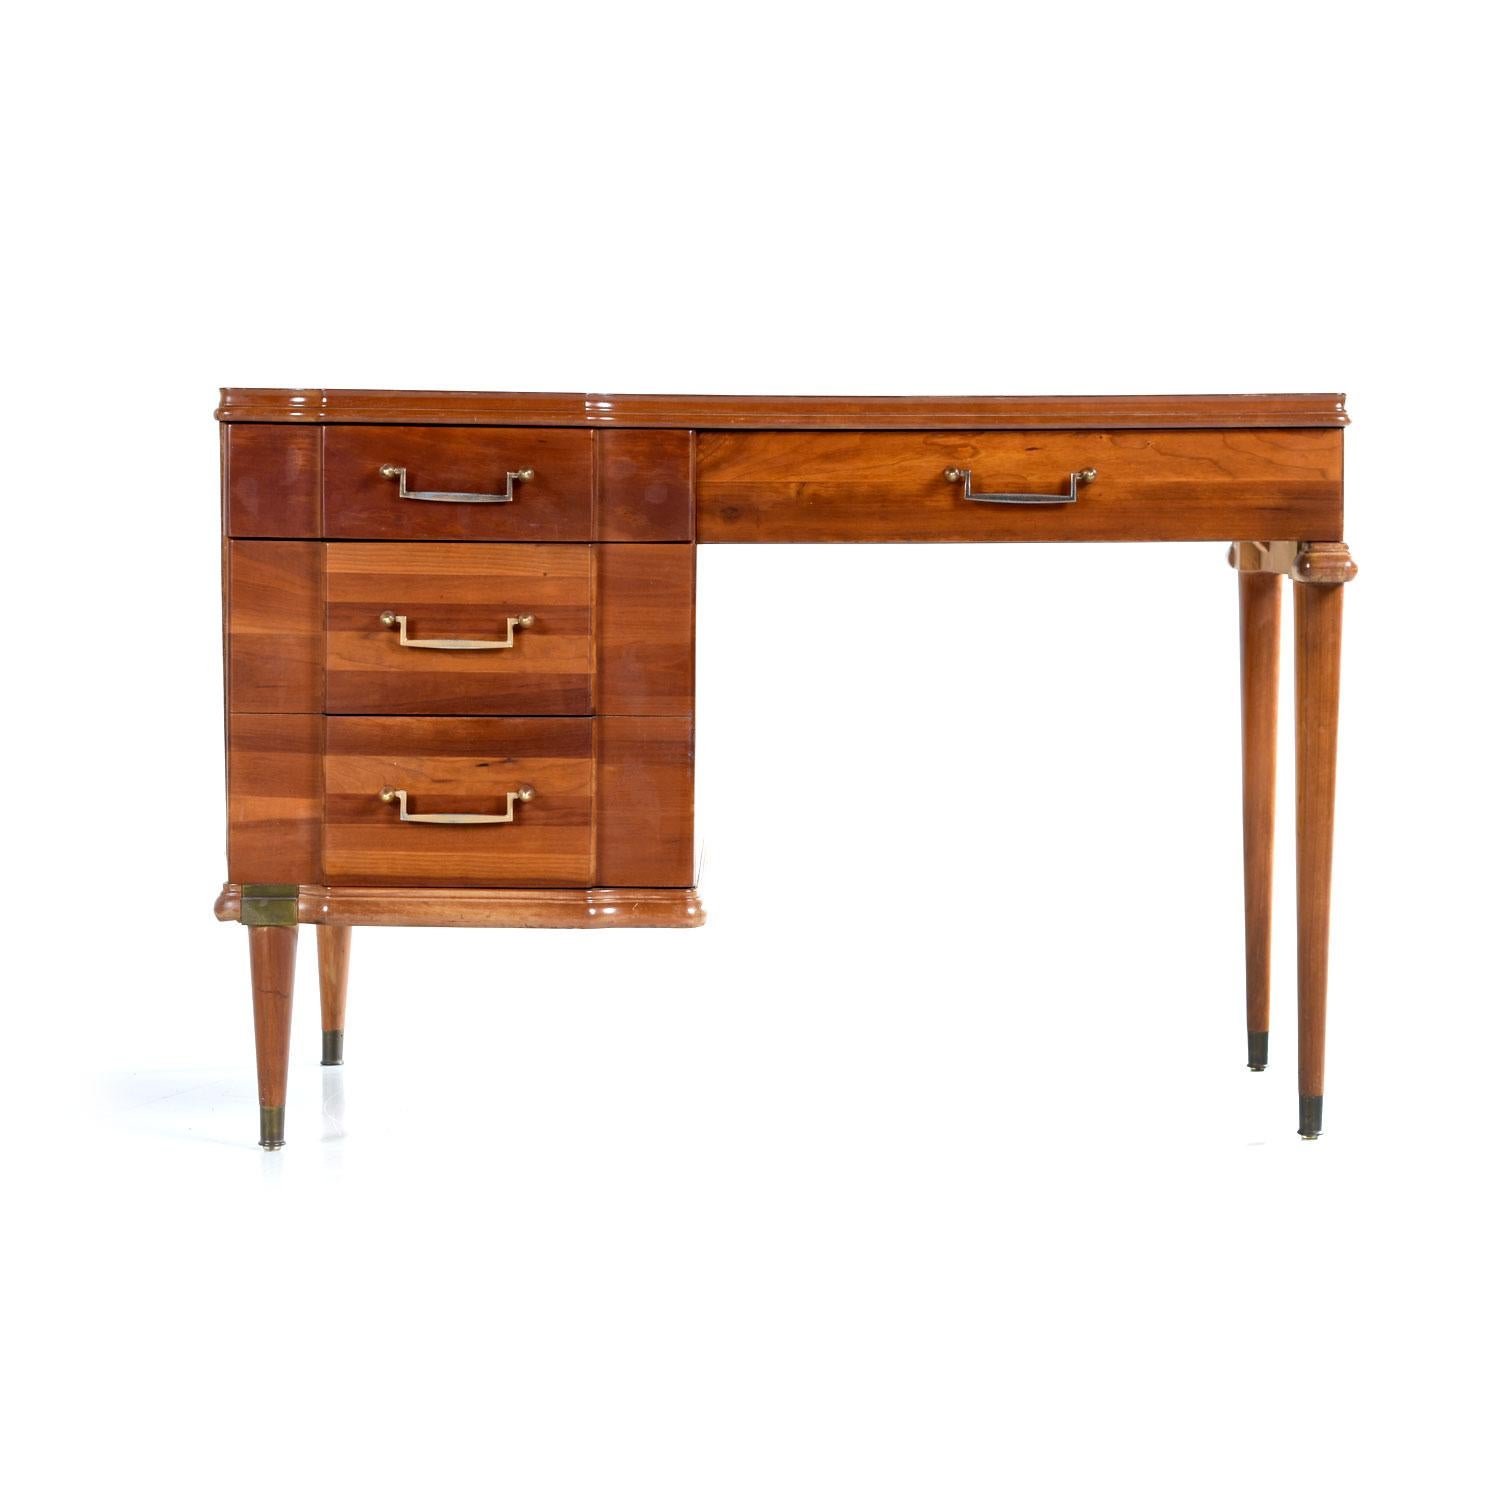 Made by Hickory Manufacturing Furniture Company, this cherrywood desk is an interesting hybrid of many styles. The machine age pulls, Campaign brass accents and Art Deco bump-outs make it tough to categorize the exact look. Regardless, it’s a pretty